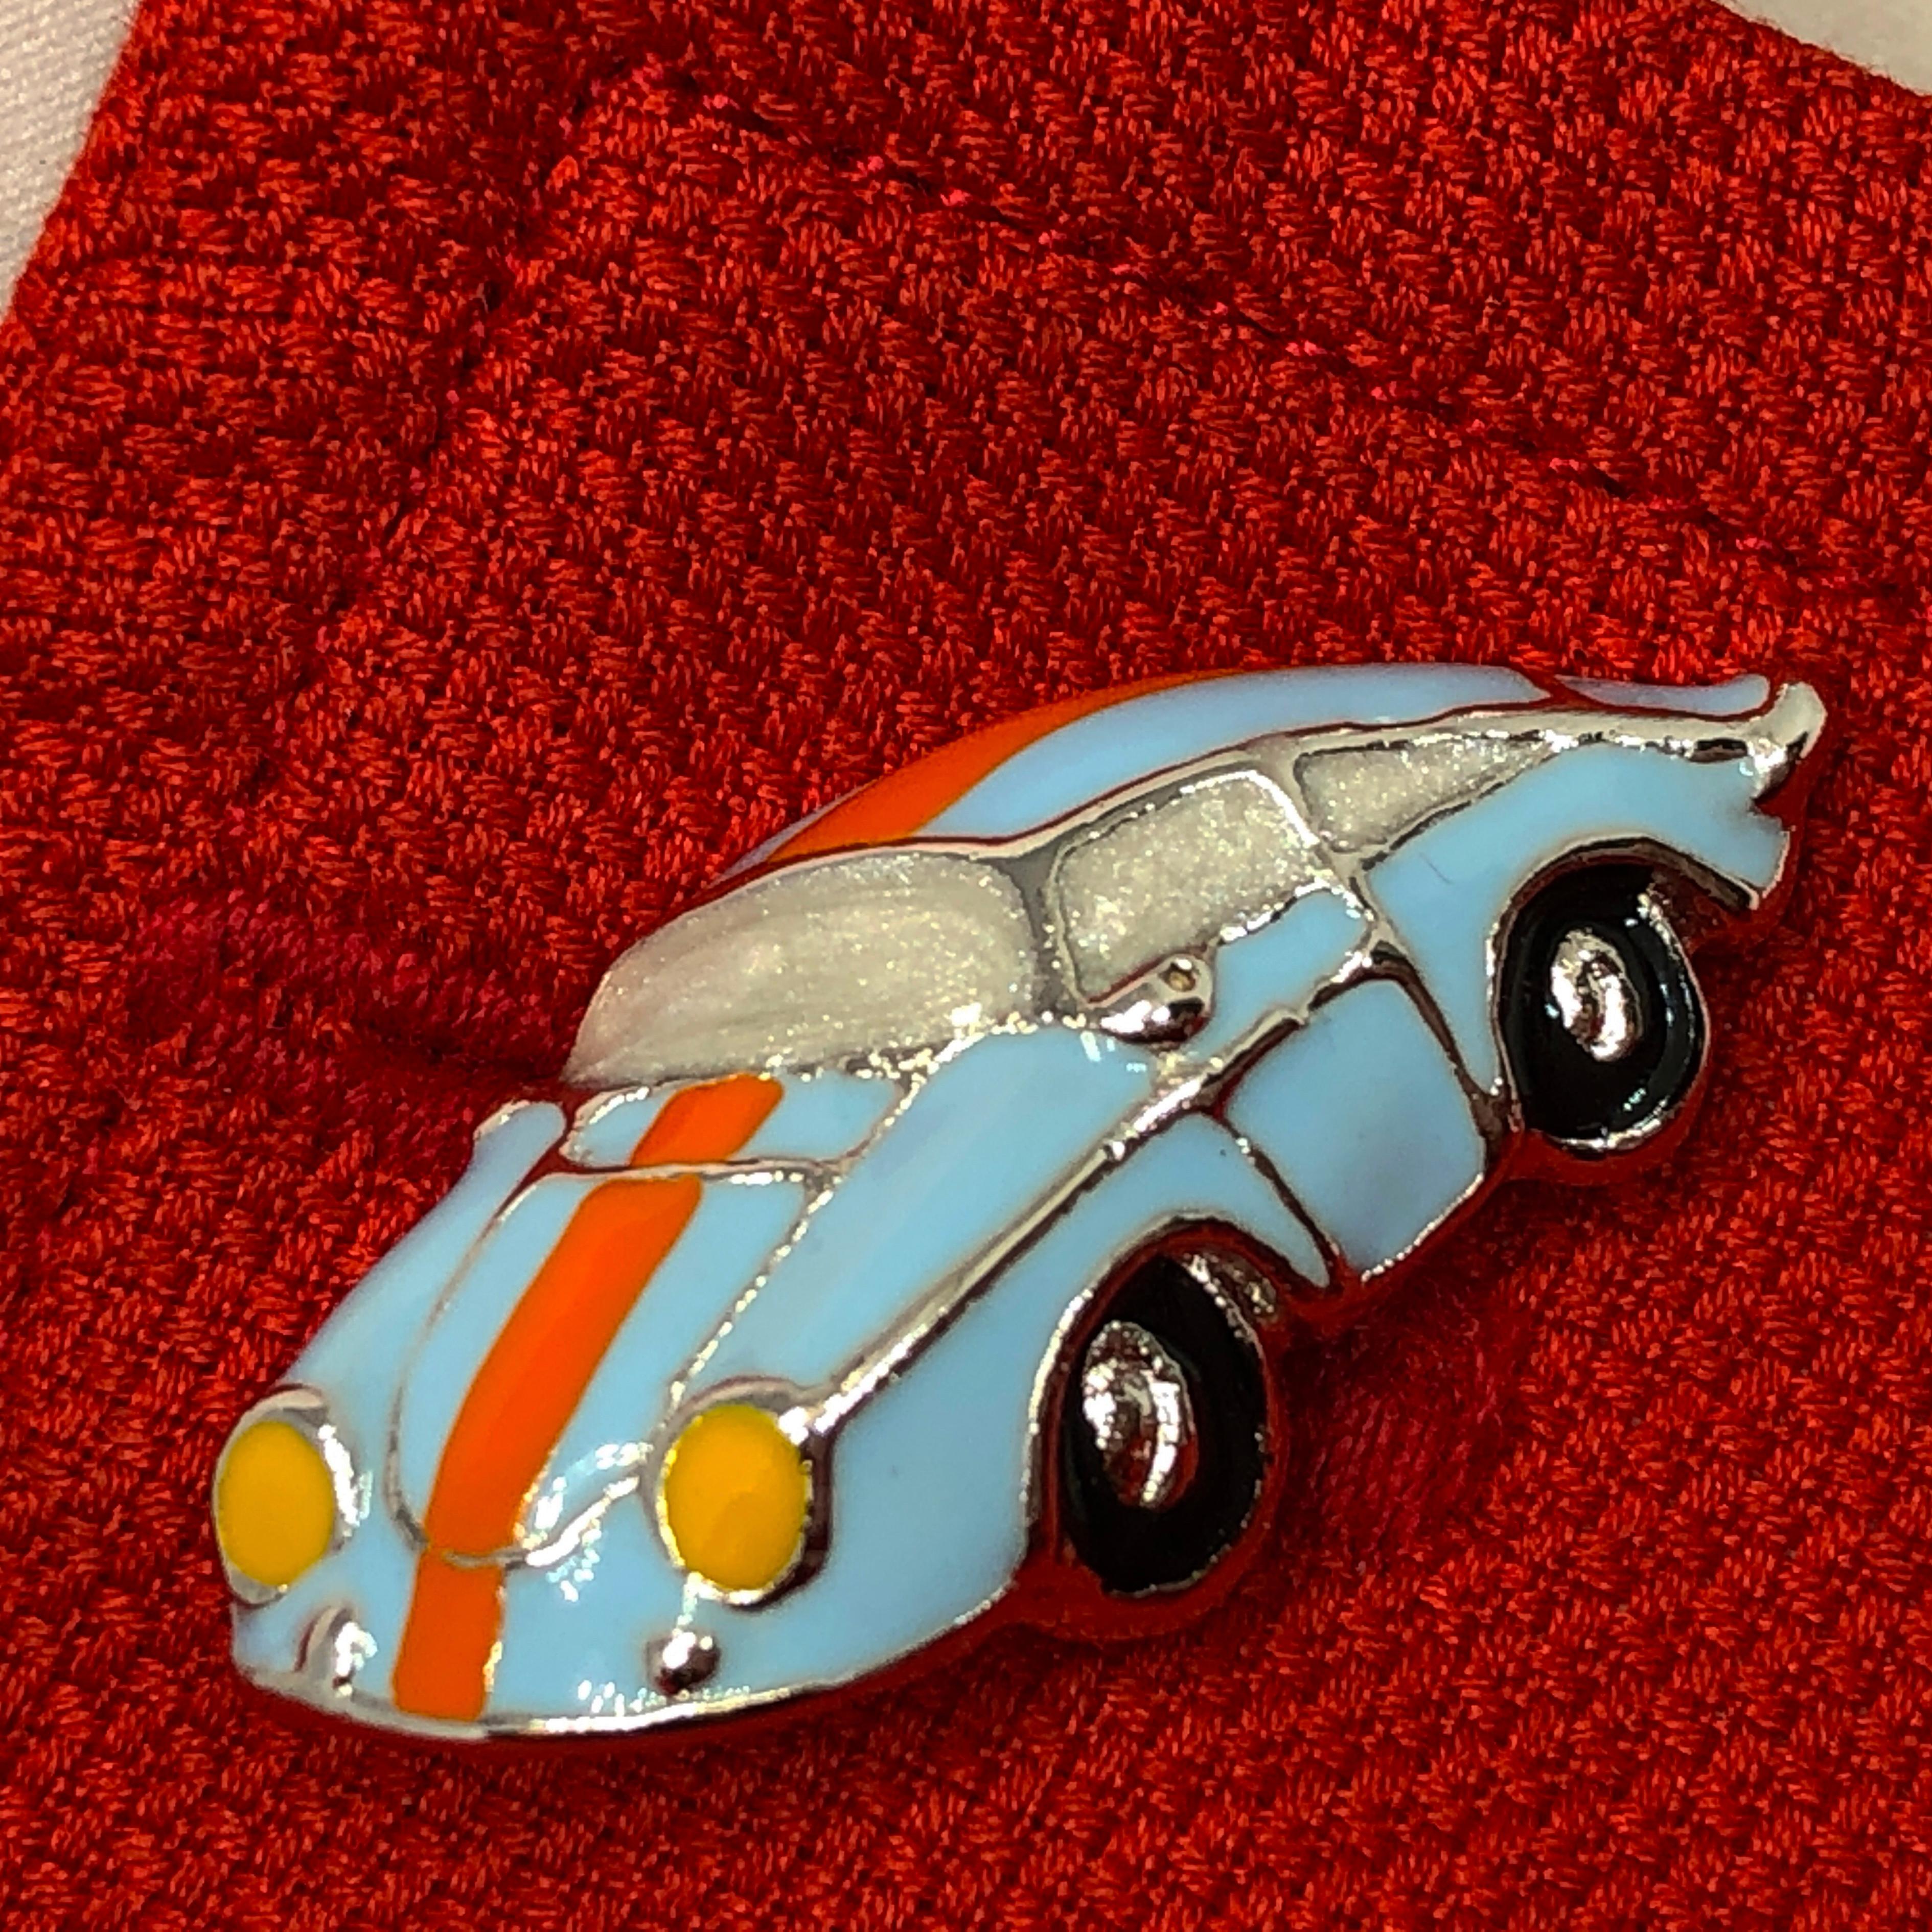 Contemporary Berca Le Man Racing Color 911 Porsche Shaped Enameled Sterling Silver Cufflinks